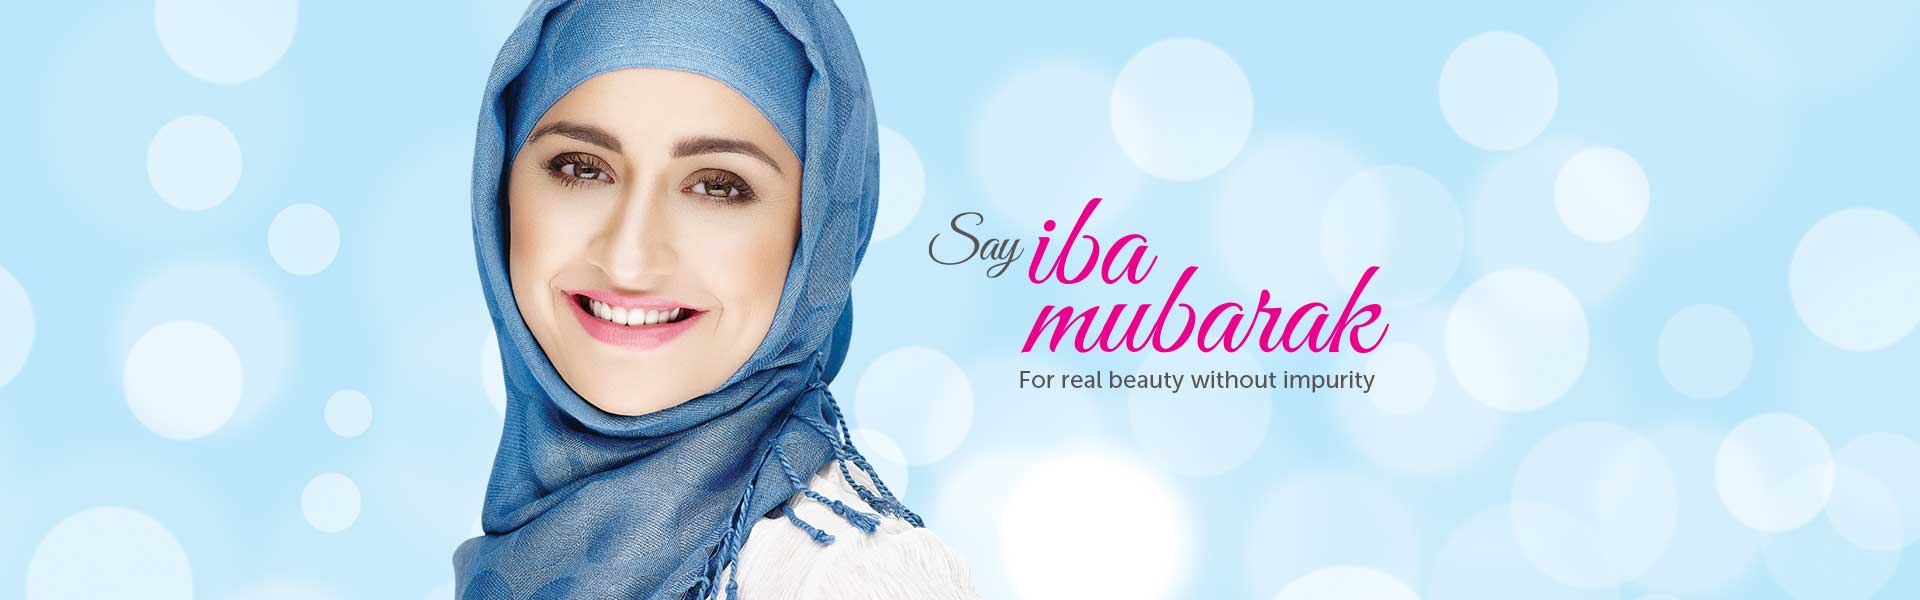 SALON CLEO FOR IBA HALAL CARE COSMETIC PRODUCT RANGE 0315009998